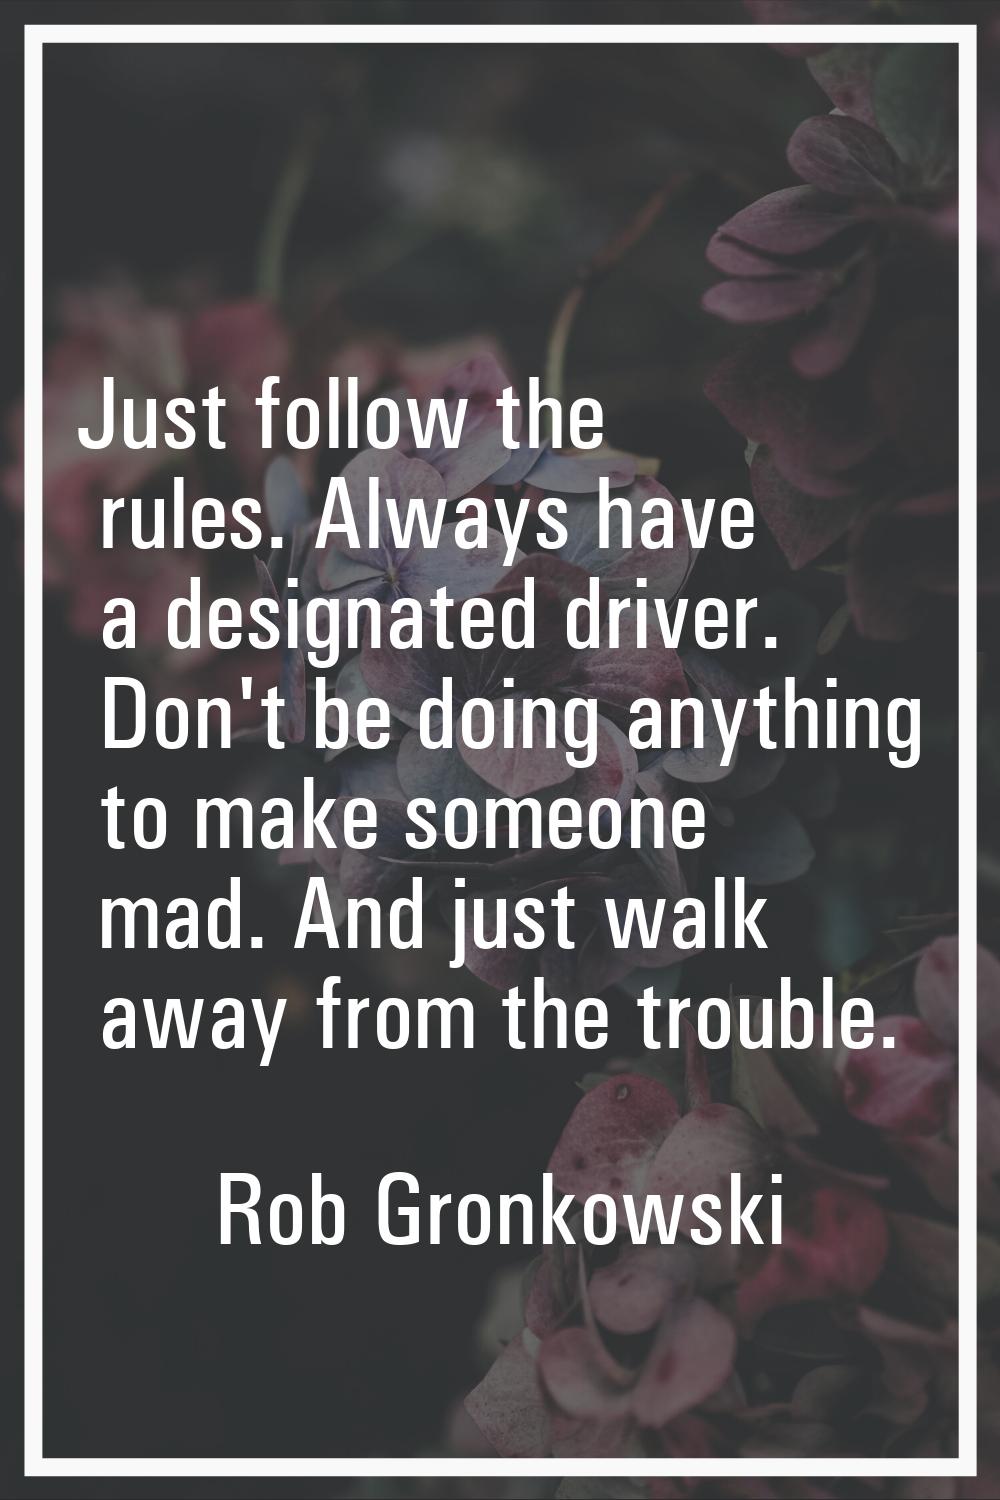 Just follow the rules. Always have a designated driver. Don't be doing anything to make someone mad